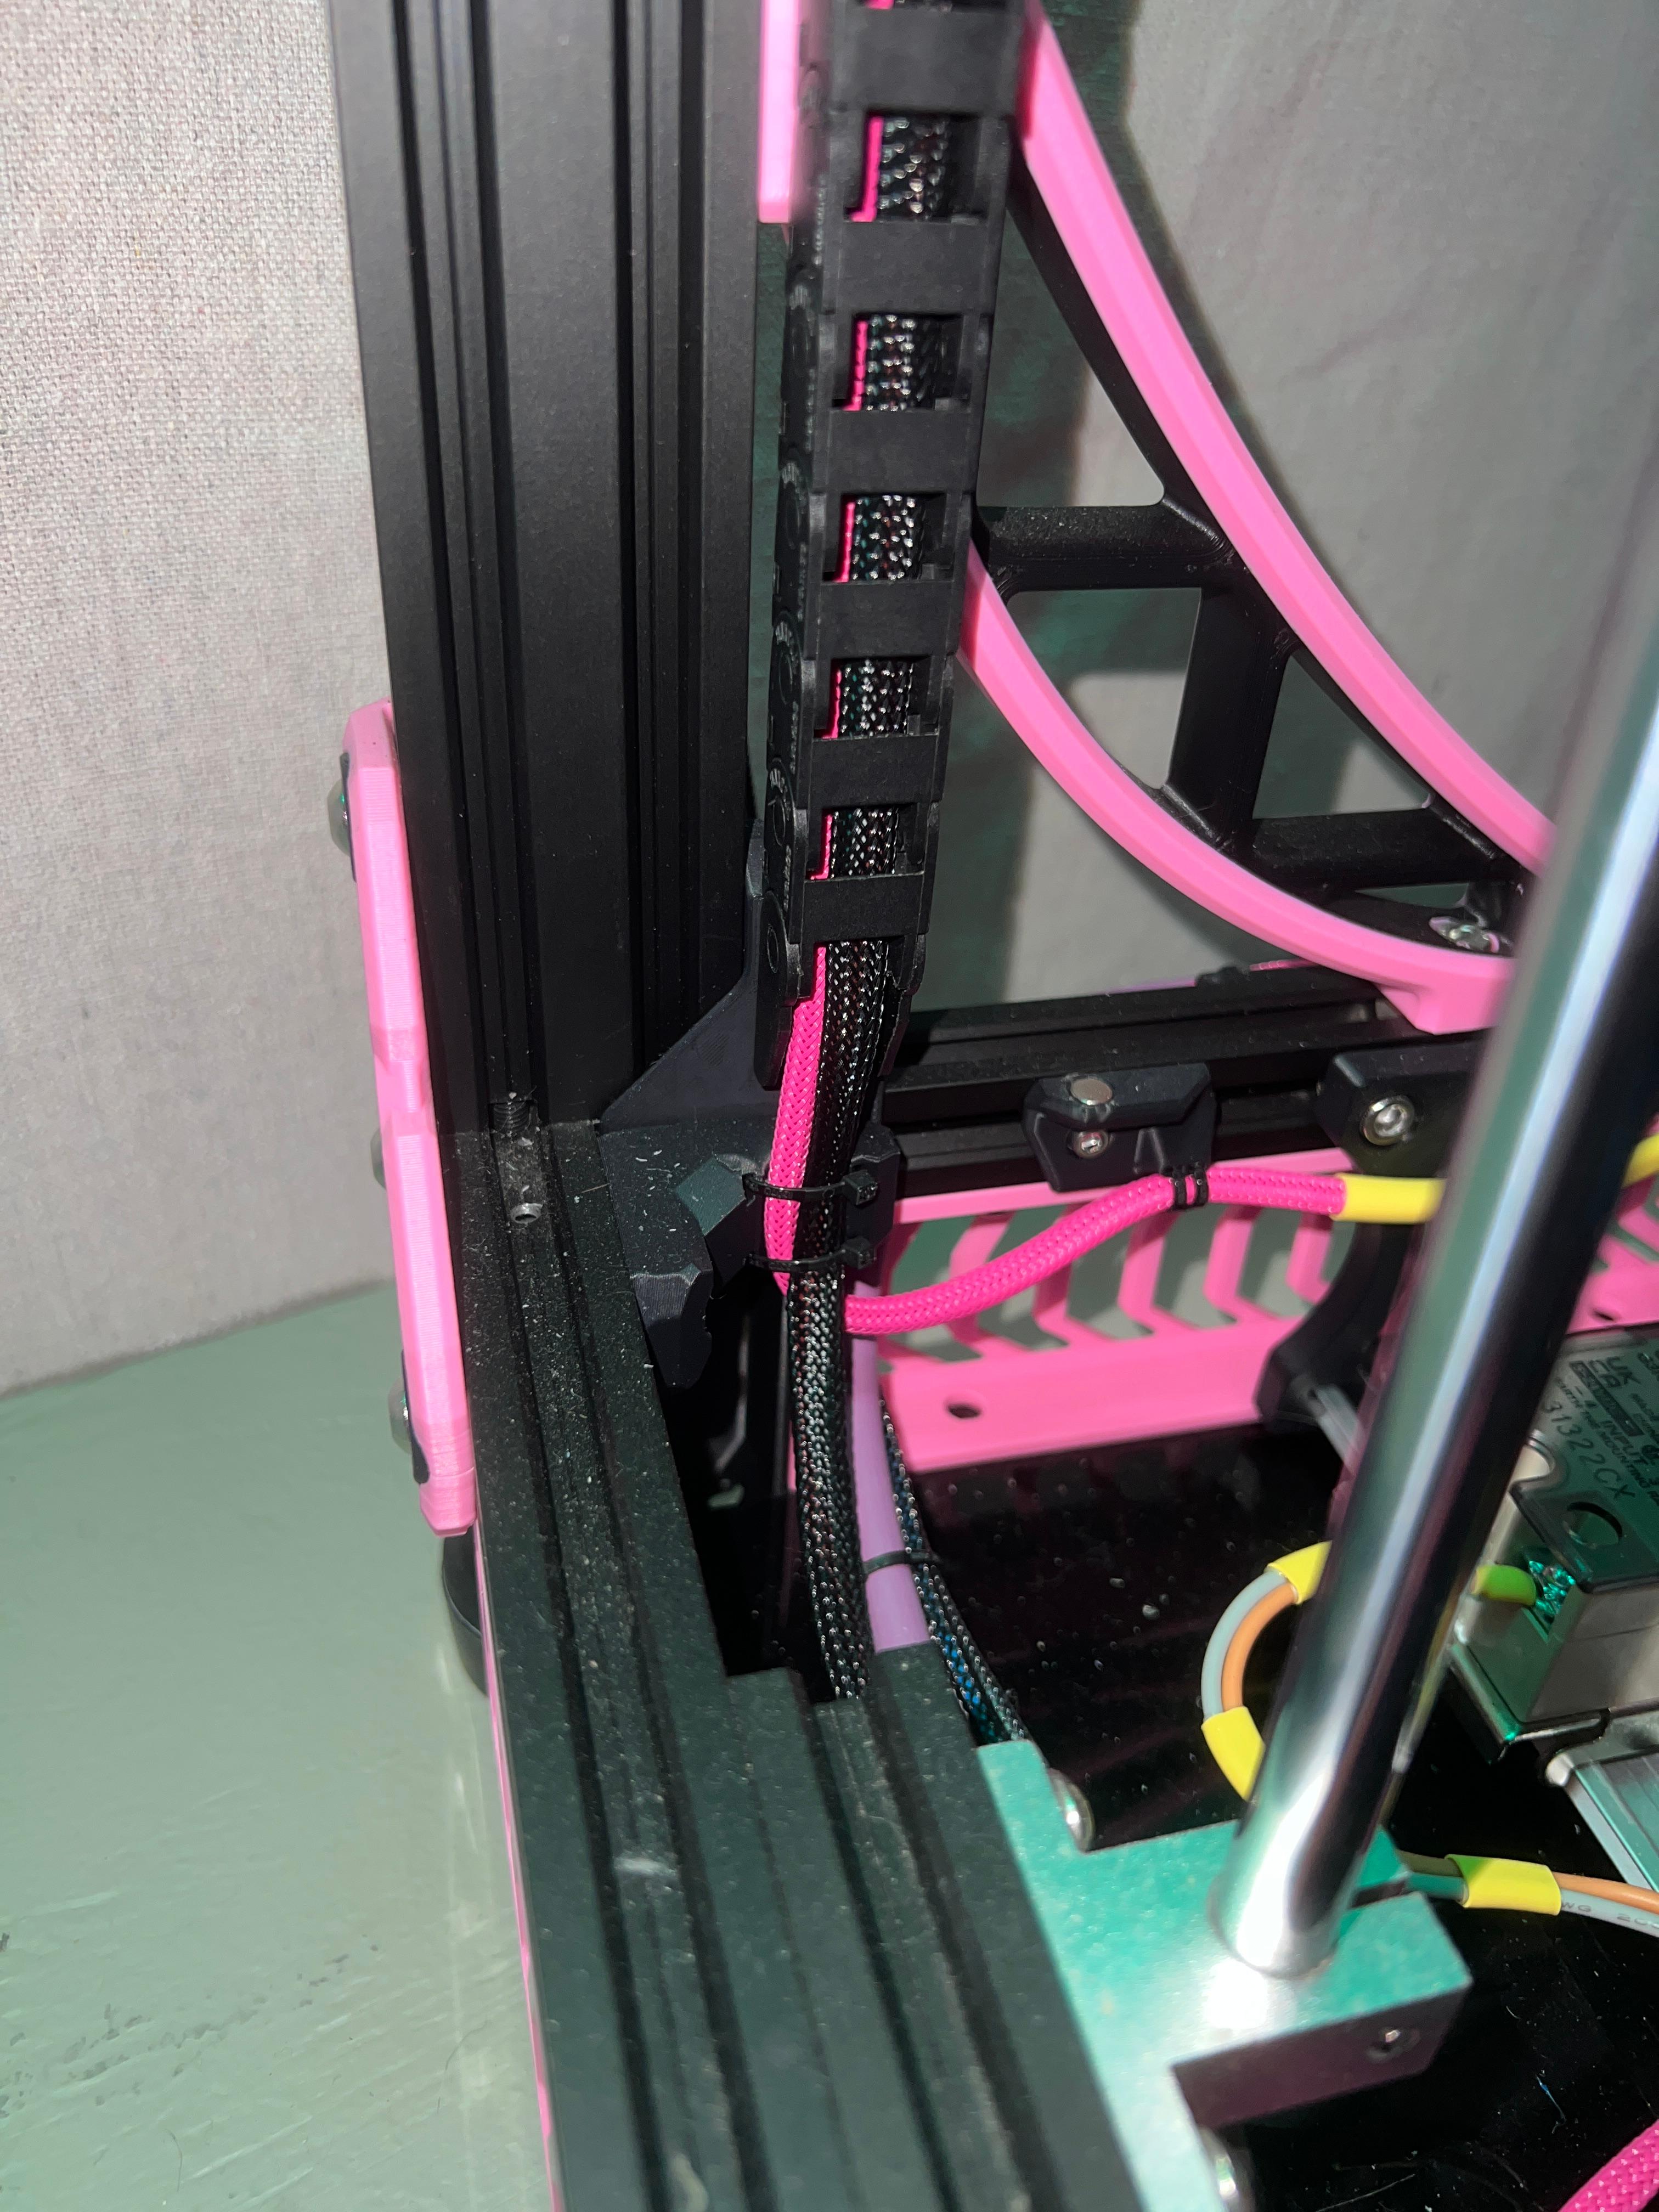 Ender 5 Plus Z Cable Chain Mod - Manage your Bed wires on the Z-Axis! 3d model